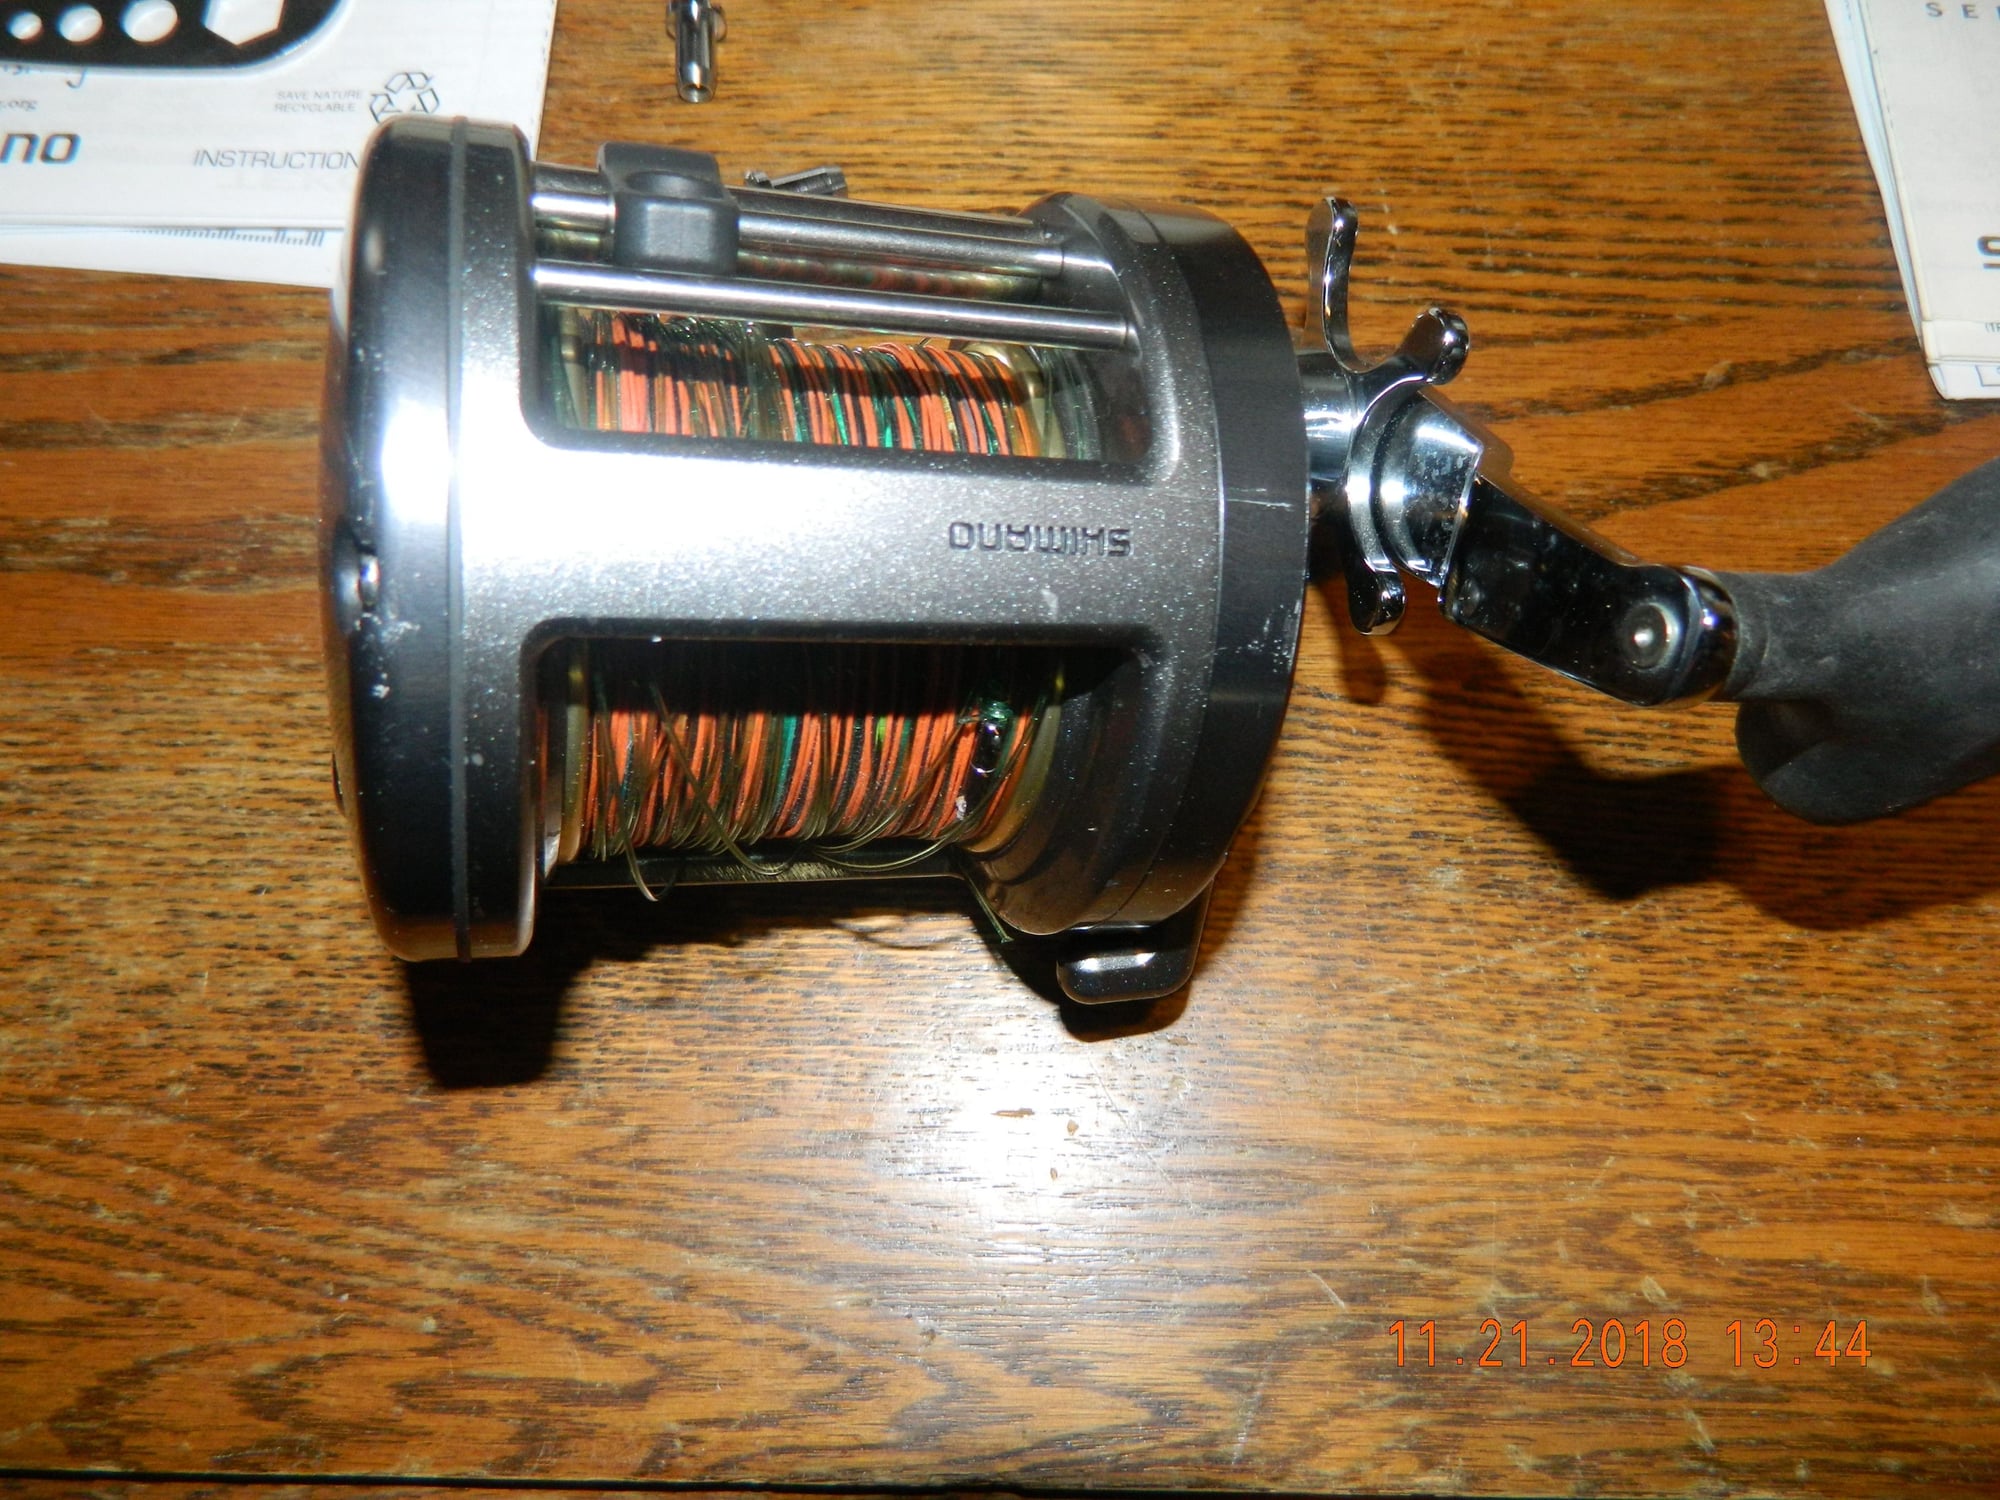 Shimano Tekota 700's - Set of 2 - spooled with leadcore line - The